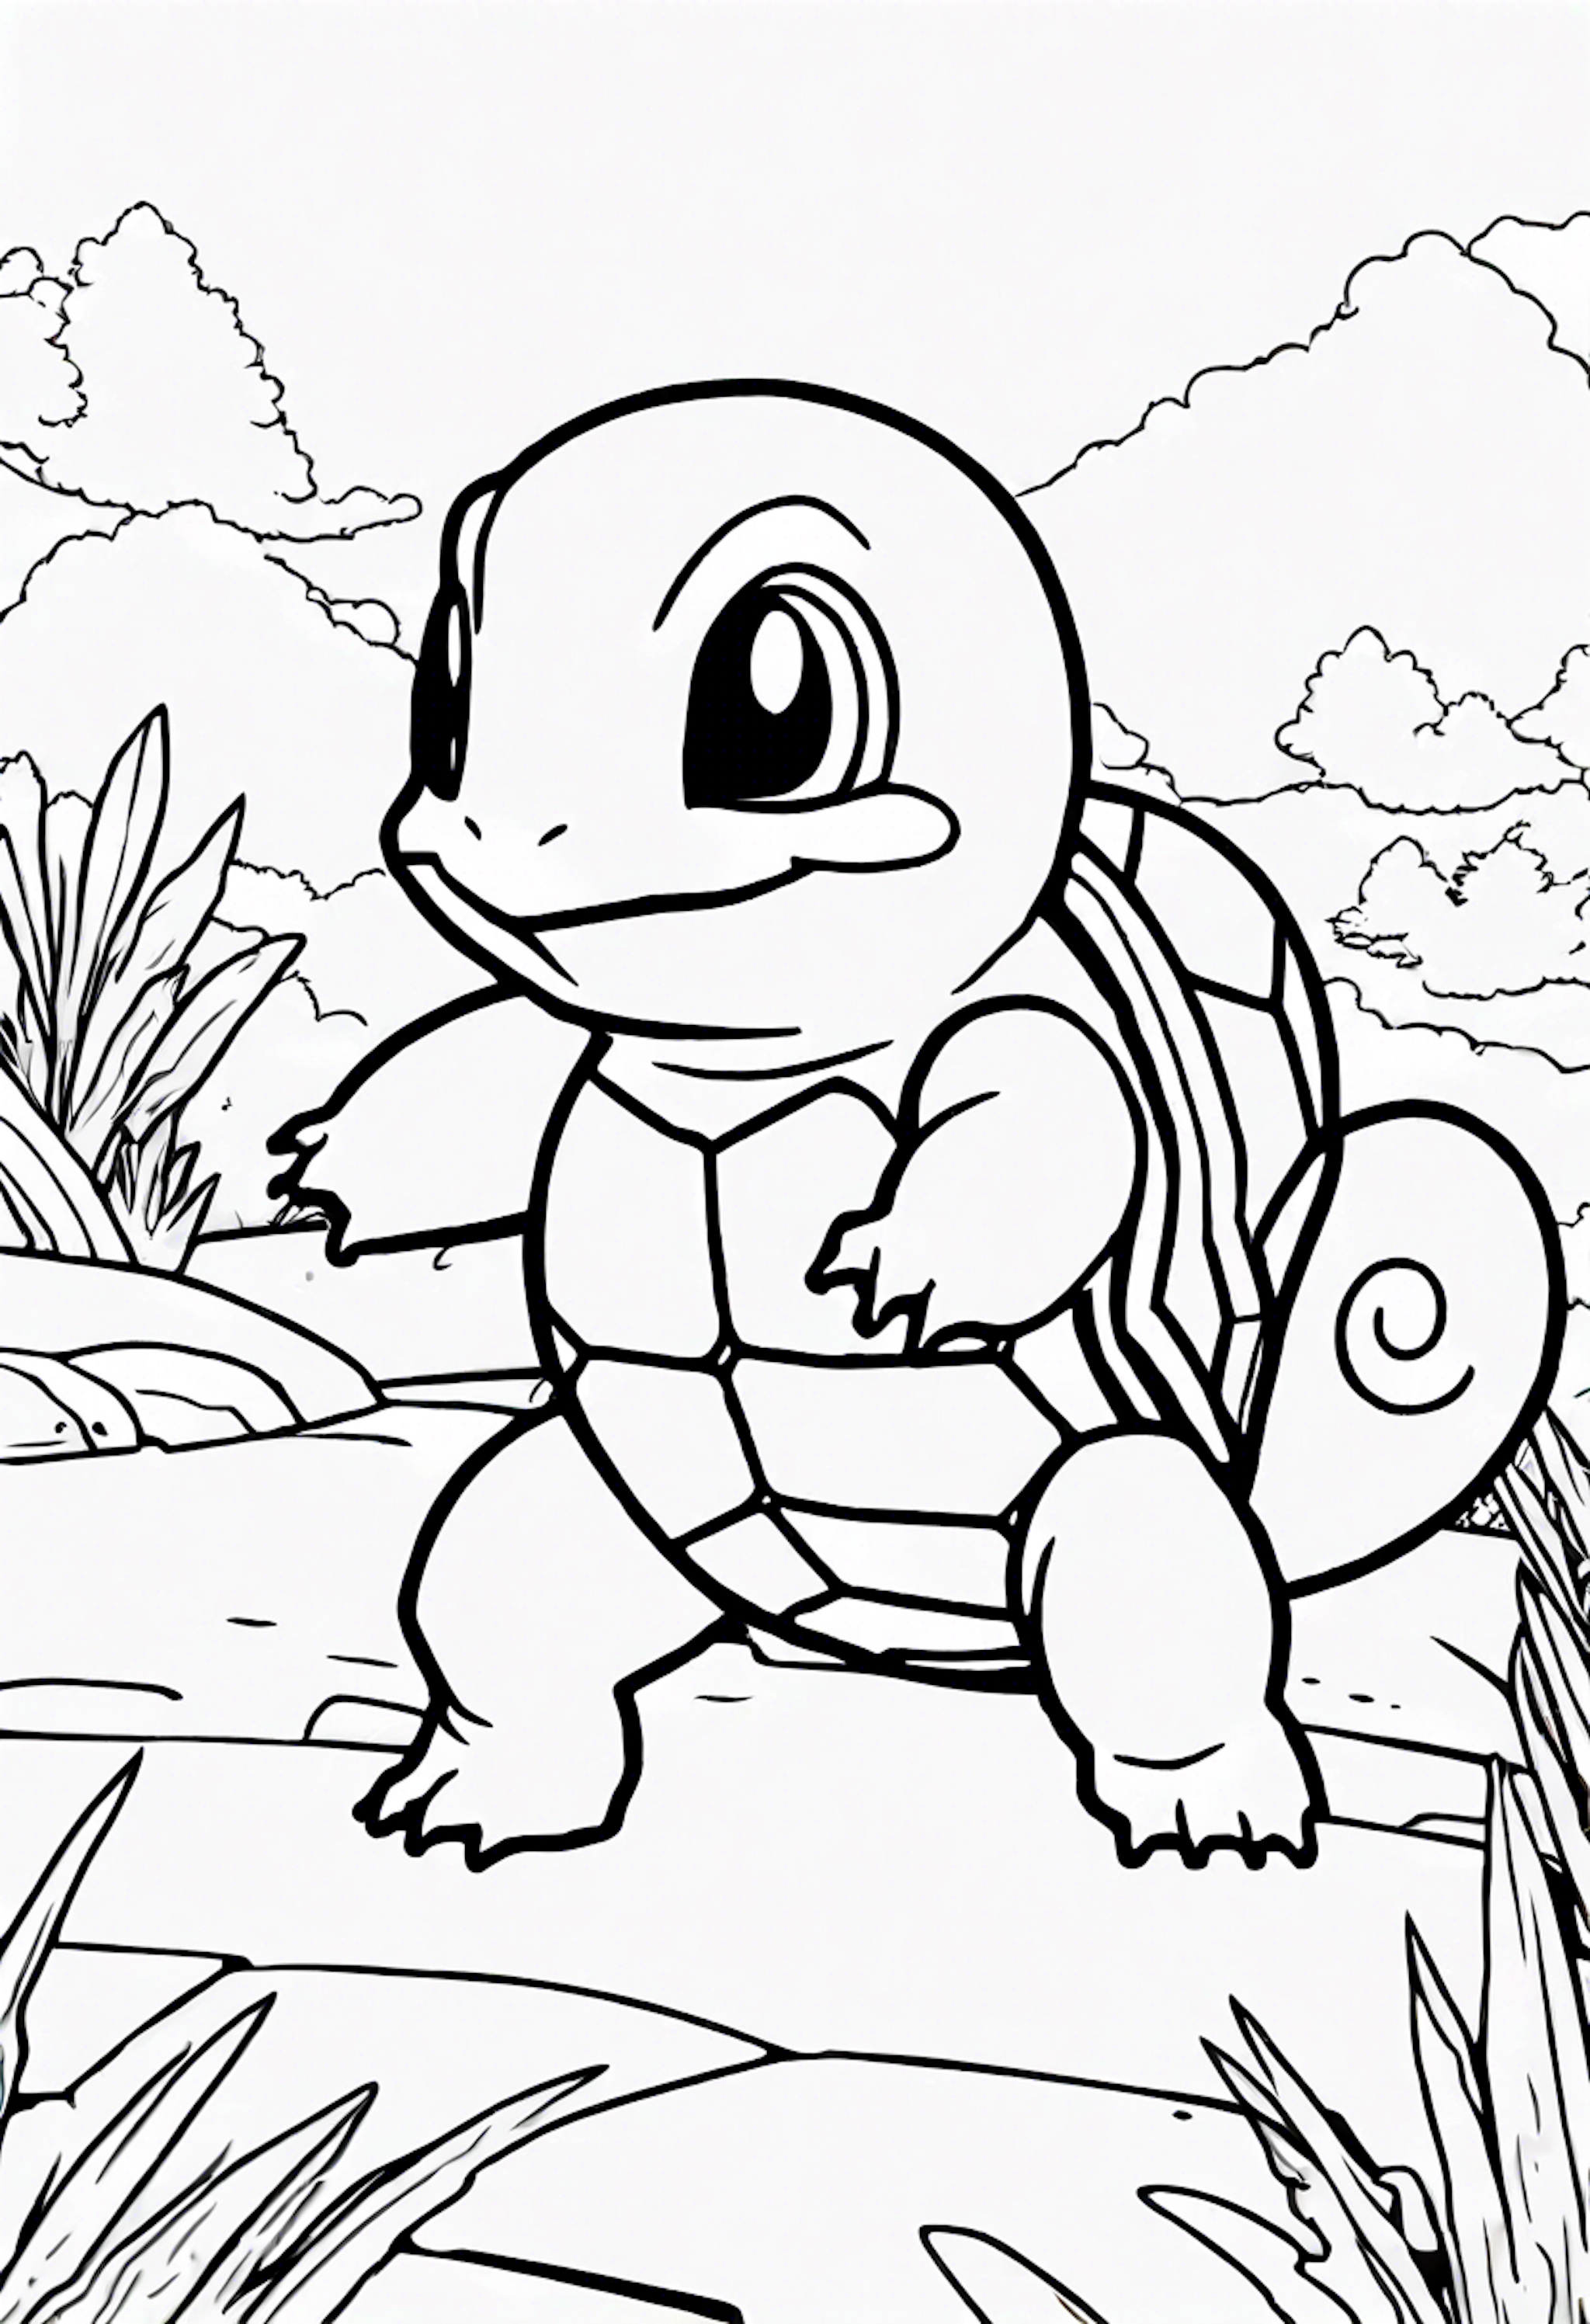 A coloring page for 33 Pokemon coloring pages